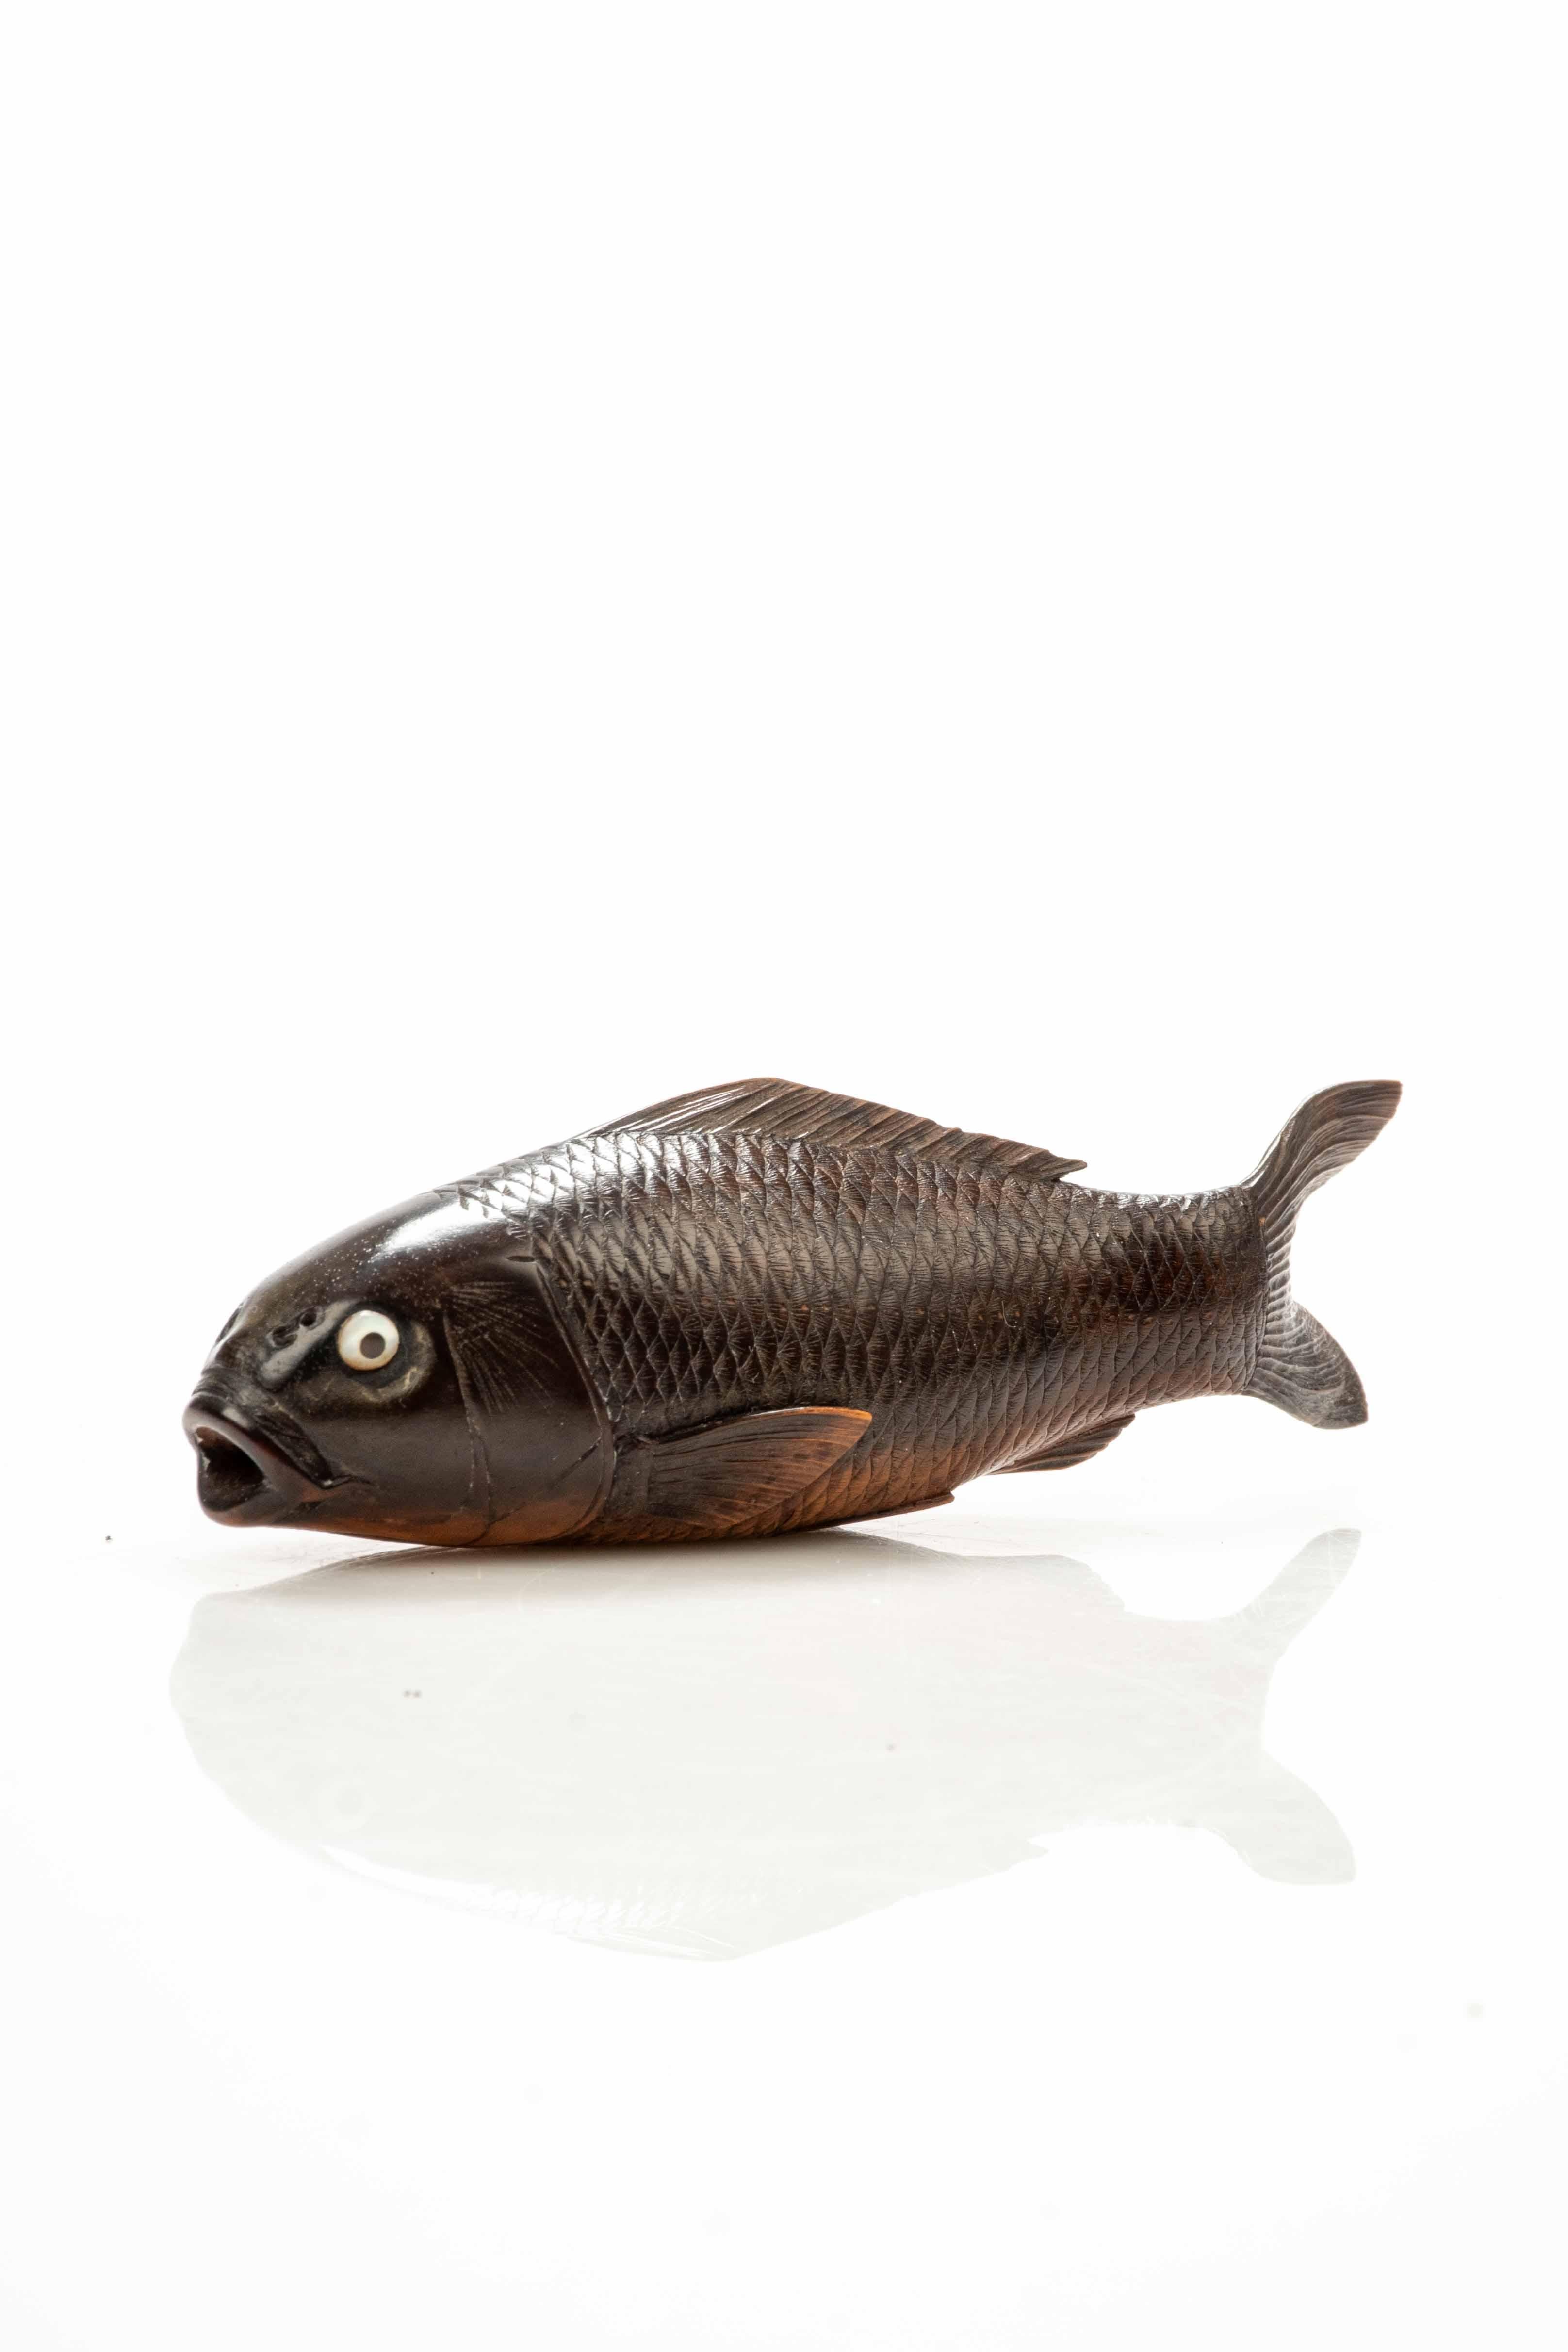 Boxwood okimono depicting a koi carp. The eyes, in mother-of-pearl and black horn, are inlaid with precision, while the overlapping scales on the body give extraordinary realism.

The koi carp was portrayed with particular attention to its movement,